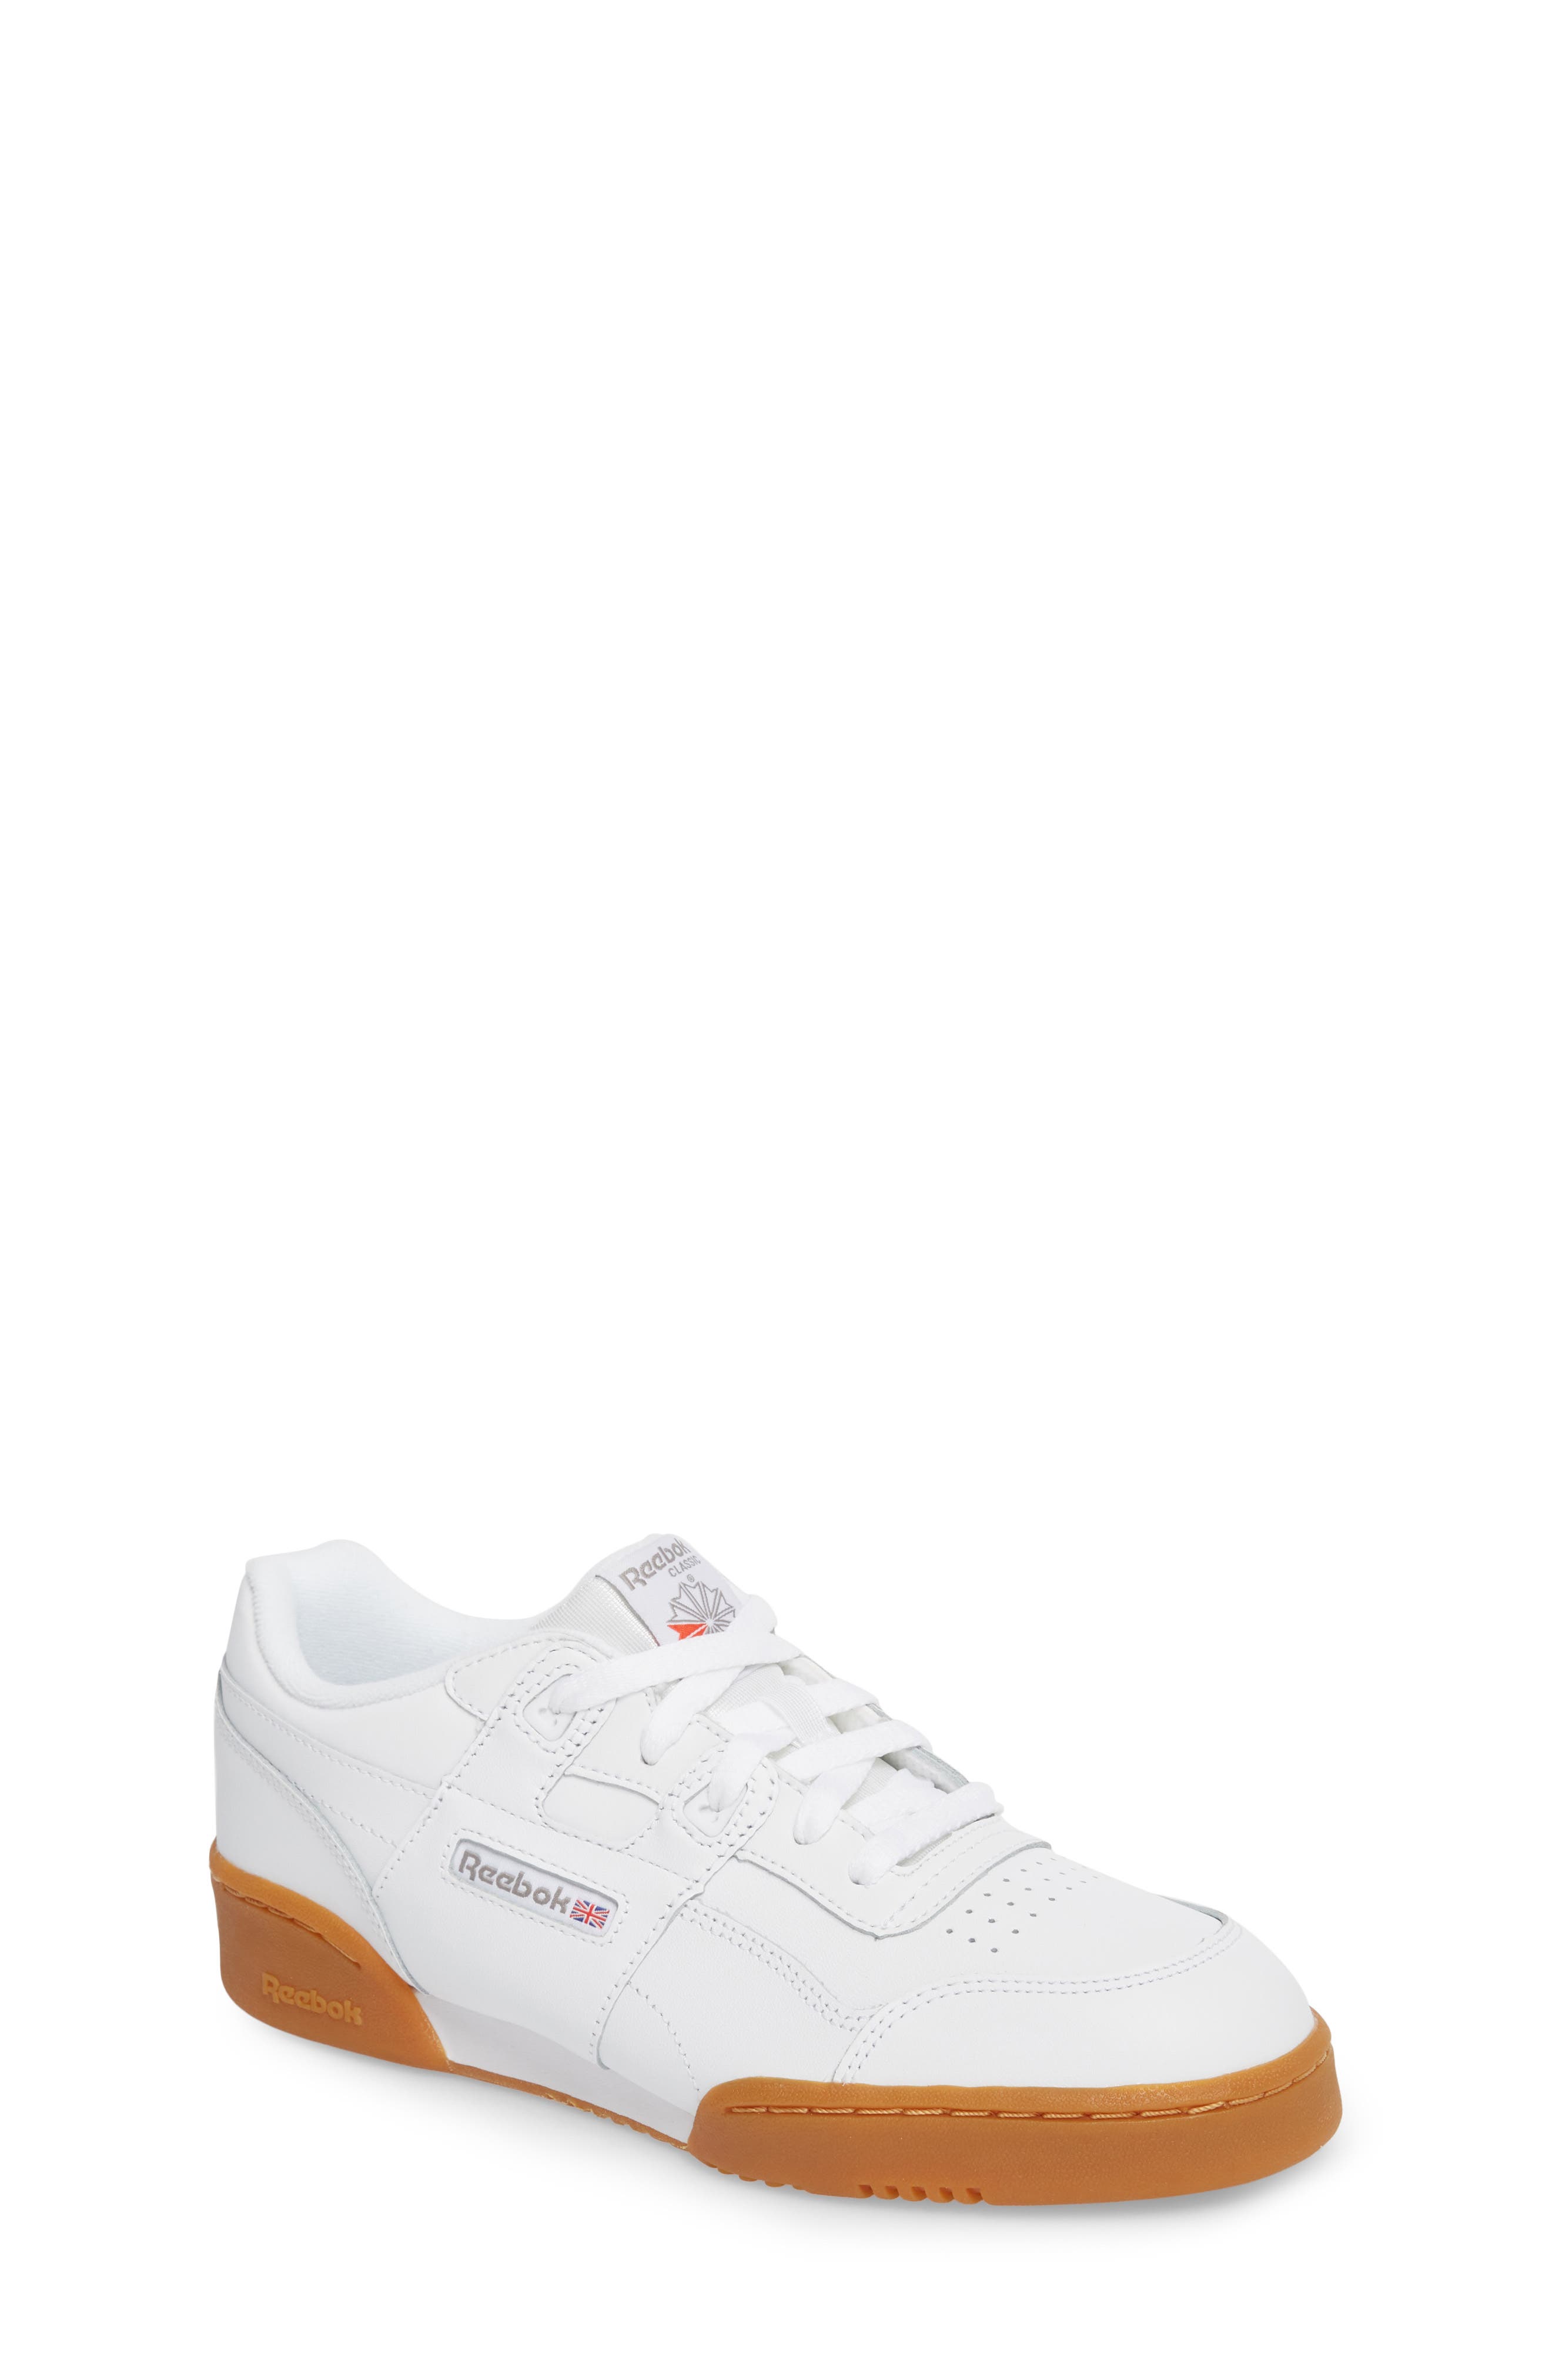 youth reebok shoes Sale,up to 50% Discounts